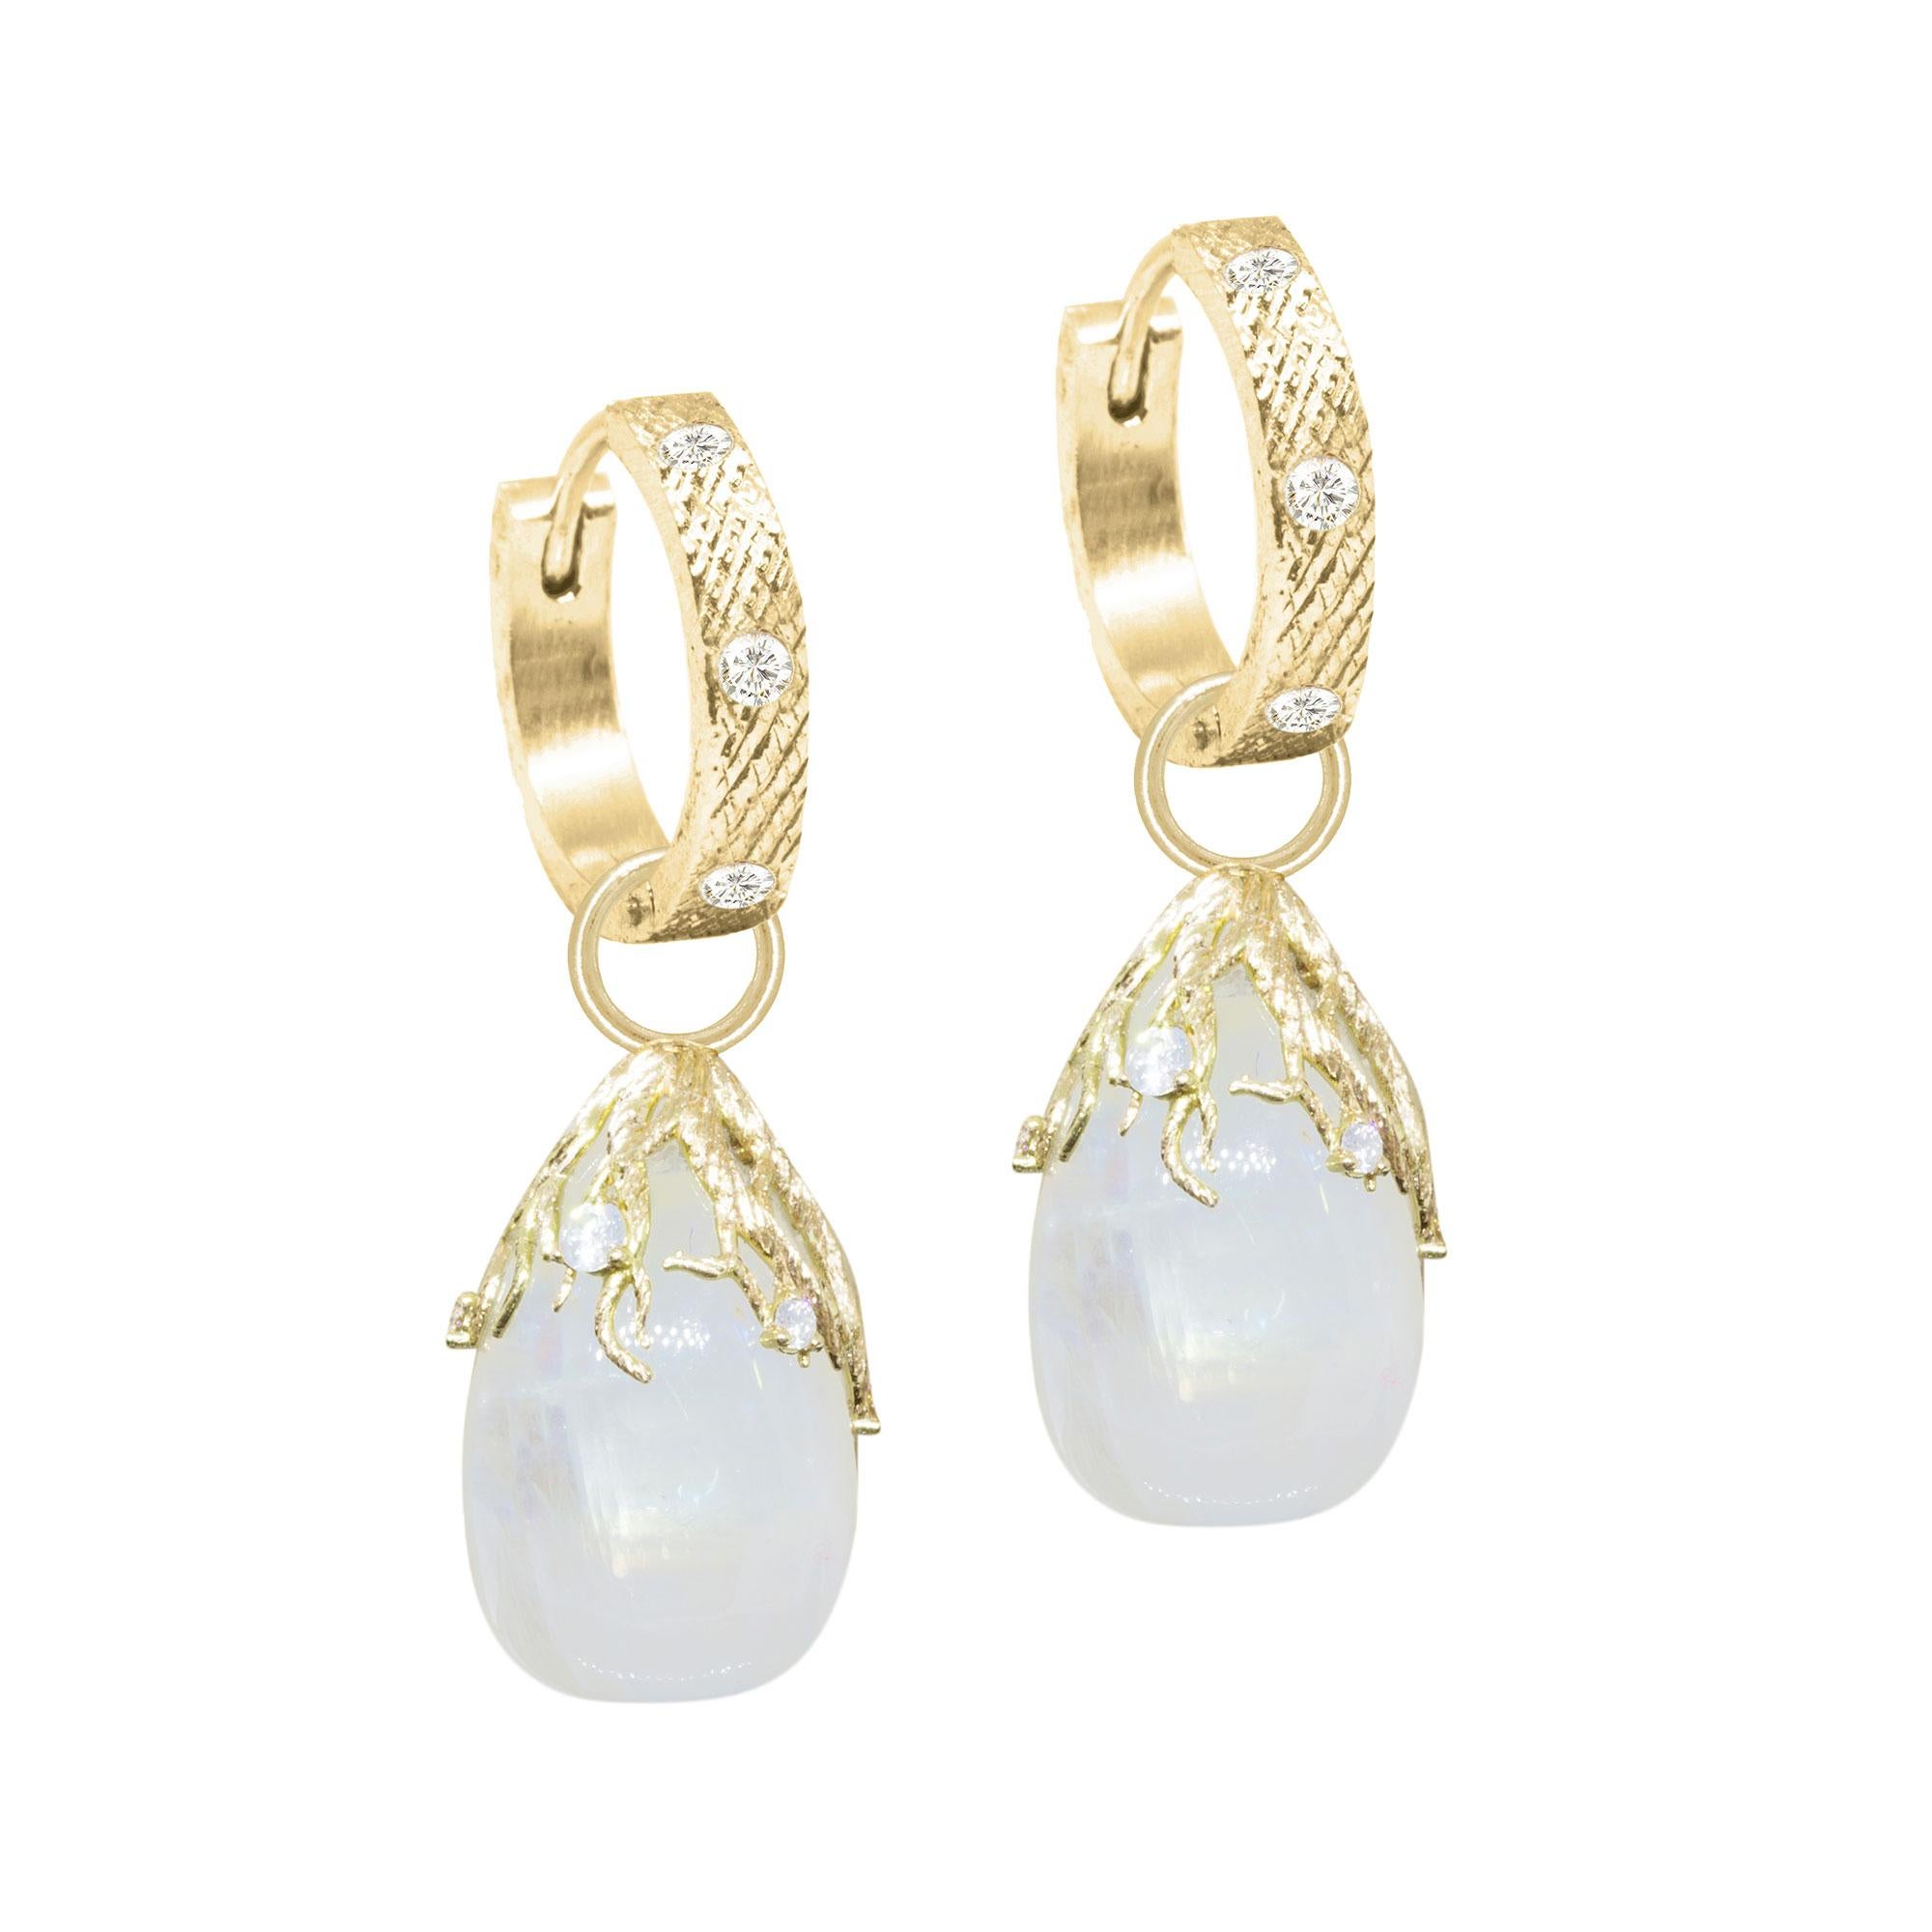 With rich, regal Moonstone, our Rooted Gold Earring Charms make the perfect addition to any hoops or charms.
Nina Nguyen Design's patent-pending earrings have an element on the back of the stud or charm to allow these pieces to transformed into